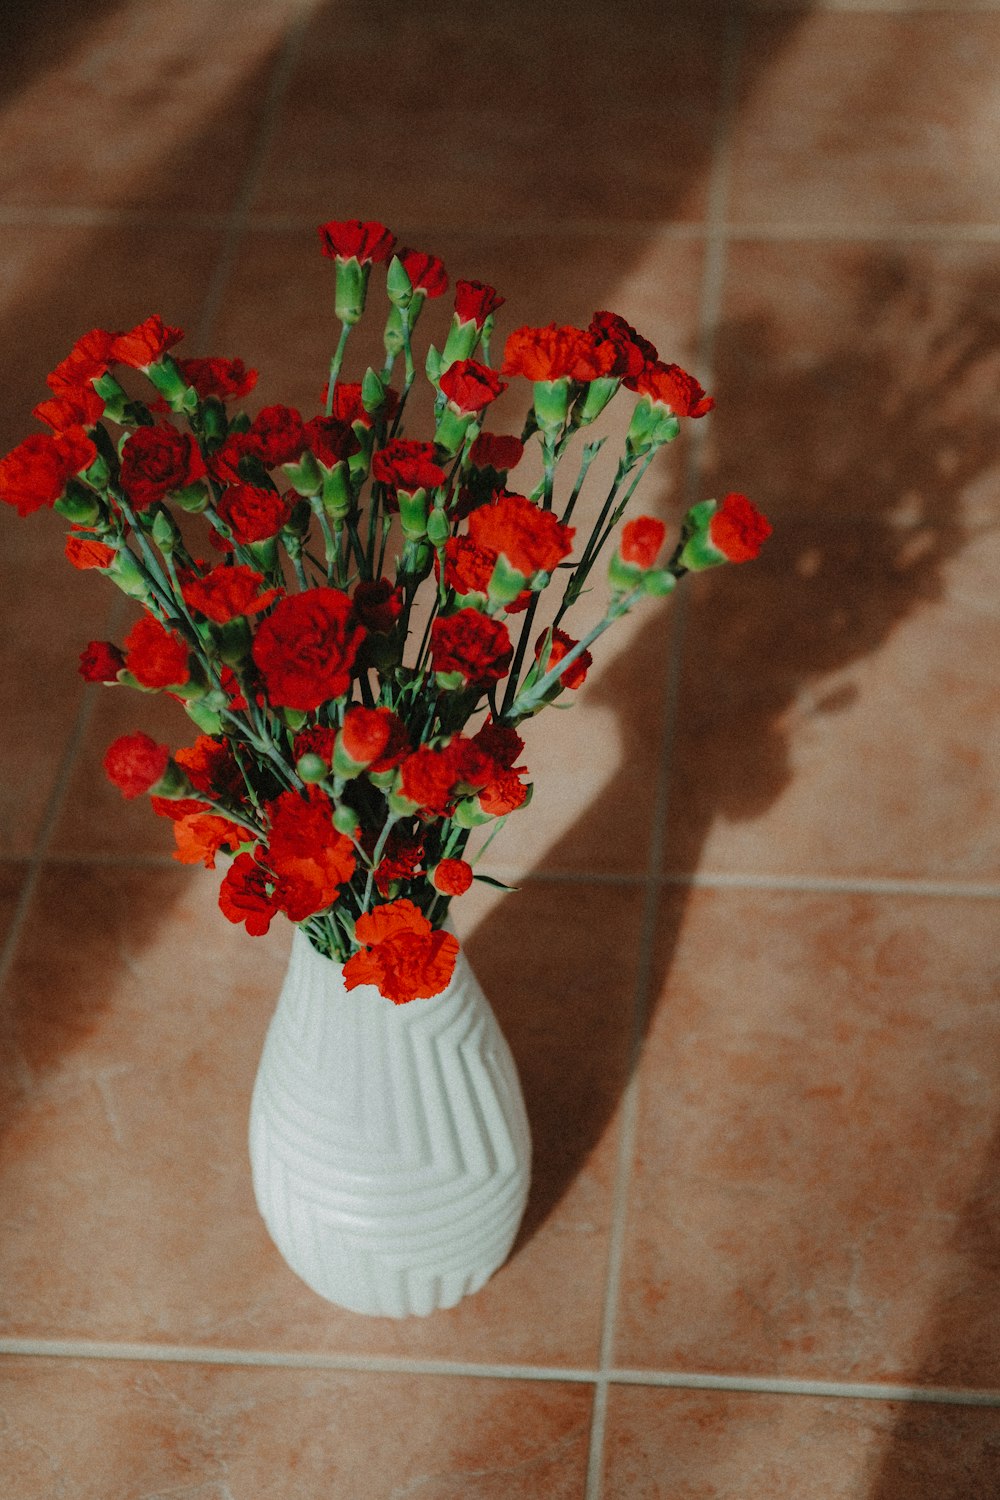 a white vase filled with red flowers on a tile floor